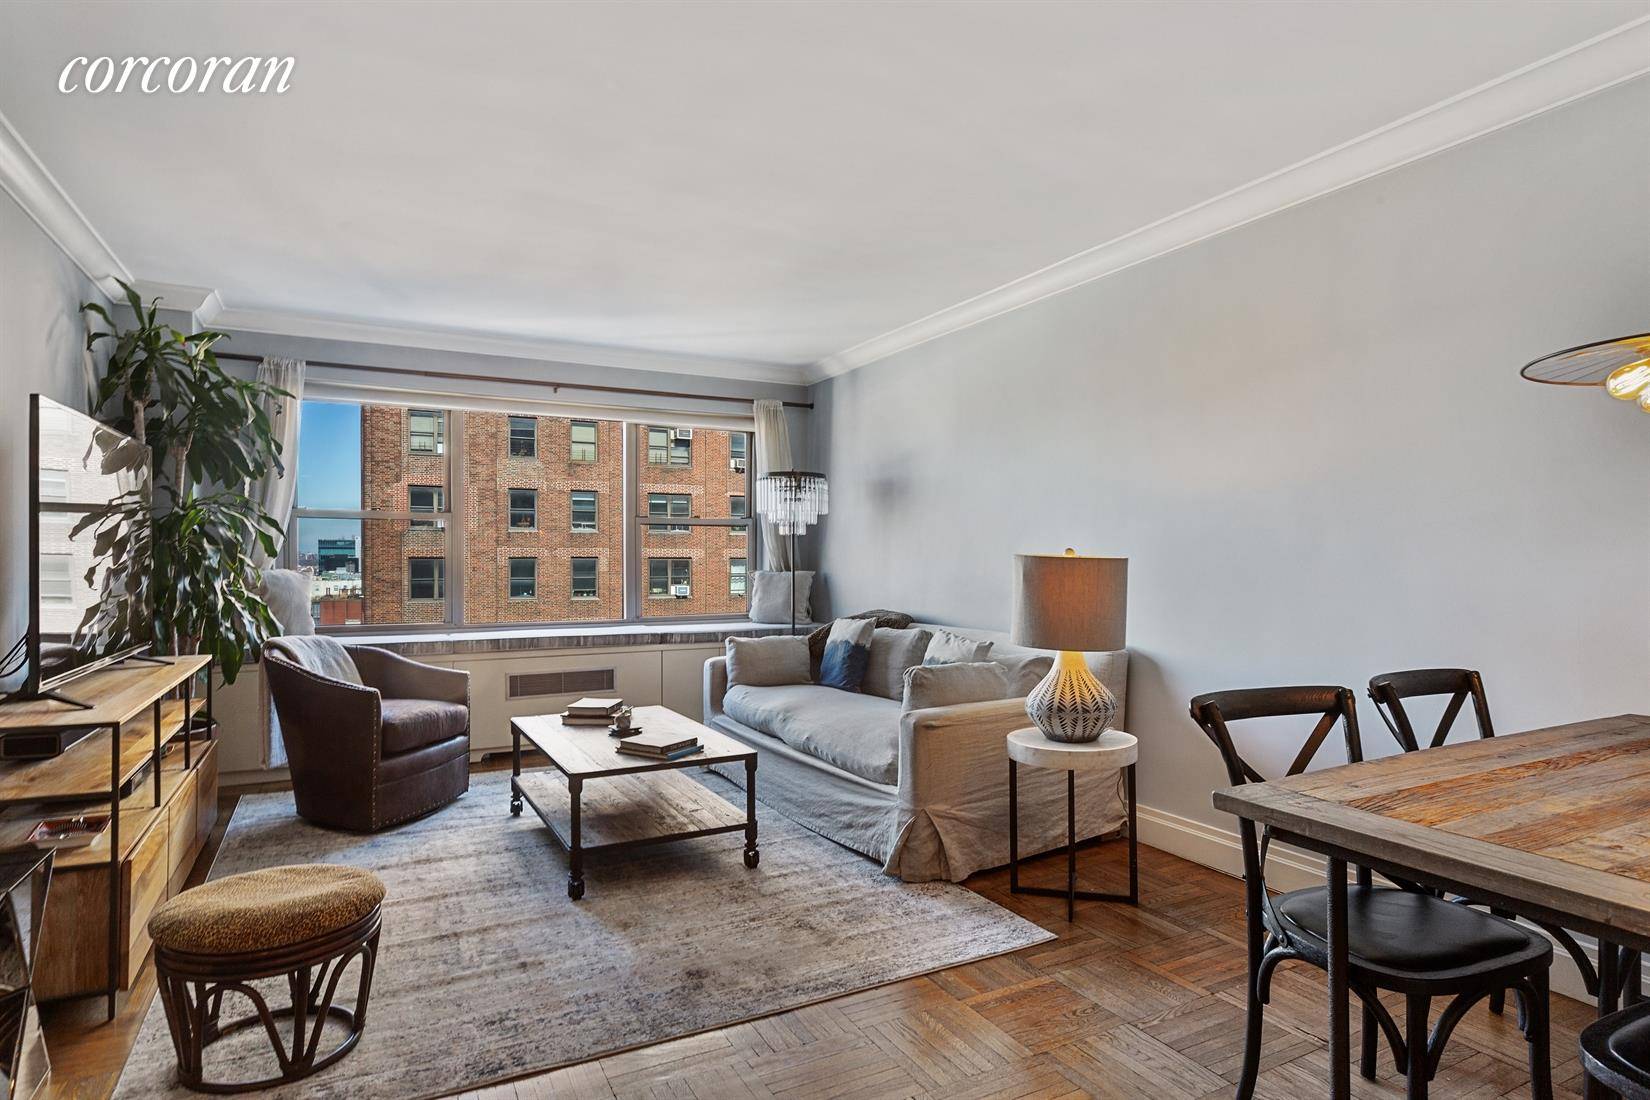 MAJOR PRICE REDUCTION ! Your opportunity awaits at 175 West 13th Street, to live in a mint custom designed renovated, sun drenched spacious 1 bedroom apartment available at The Cambridge ...